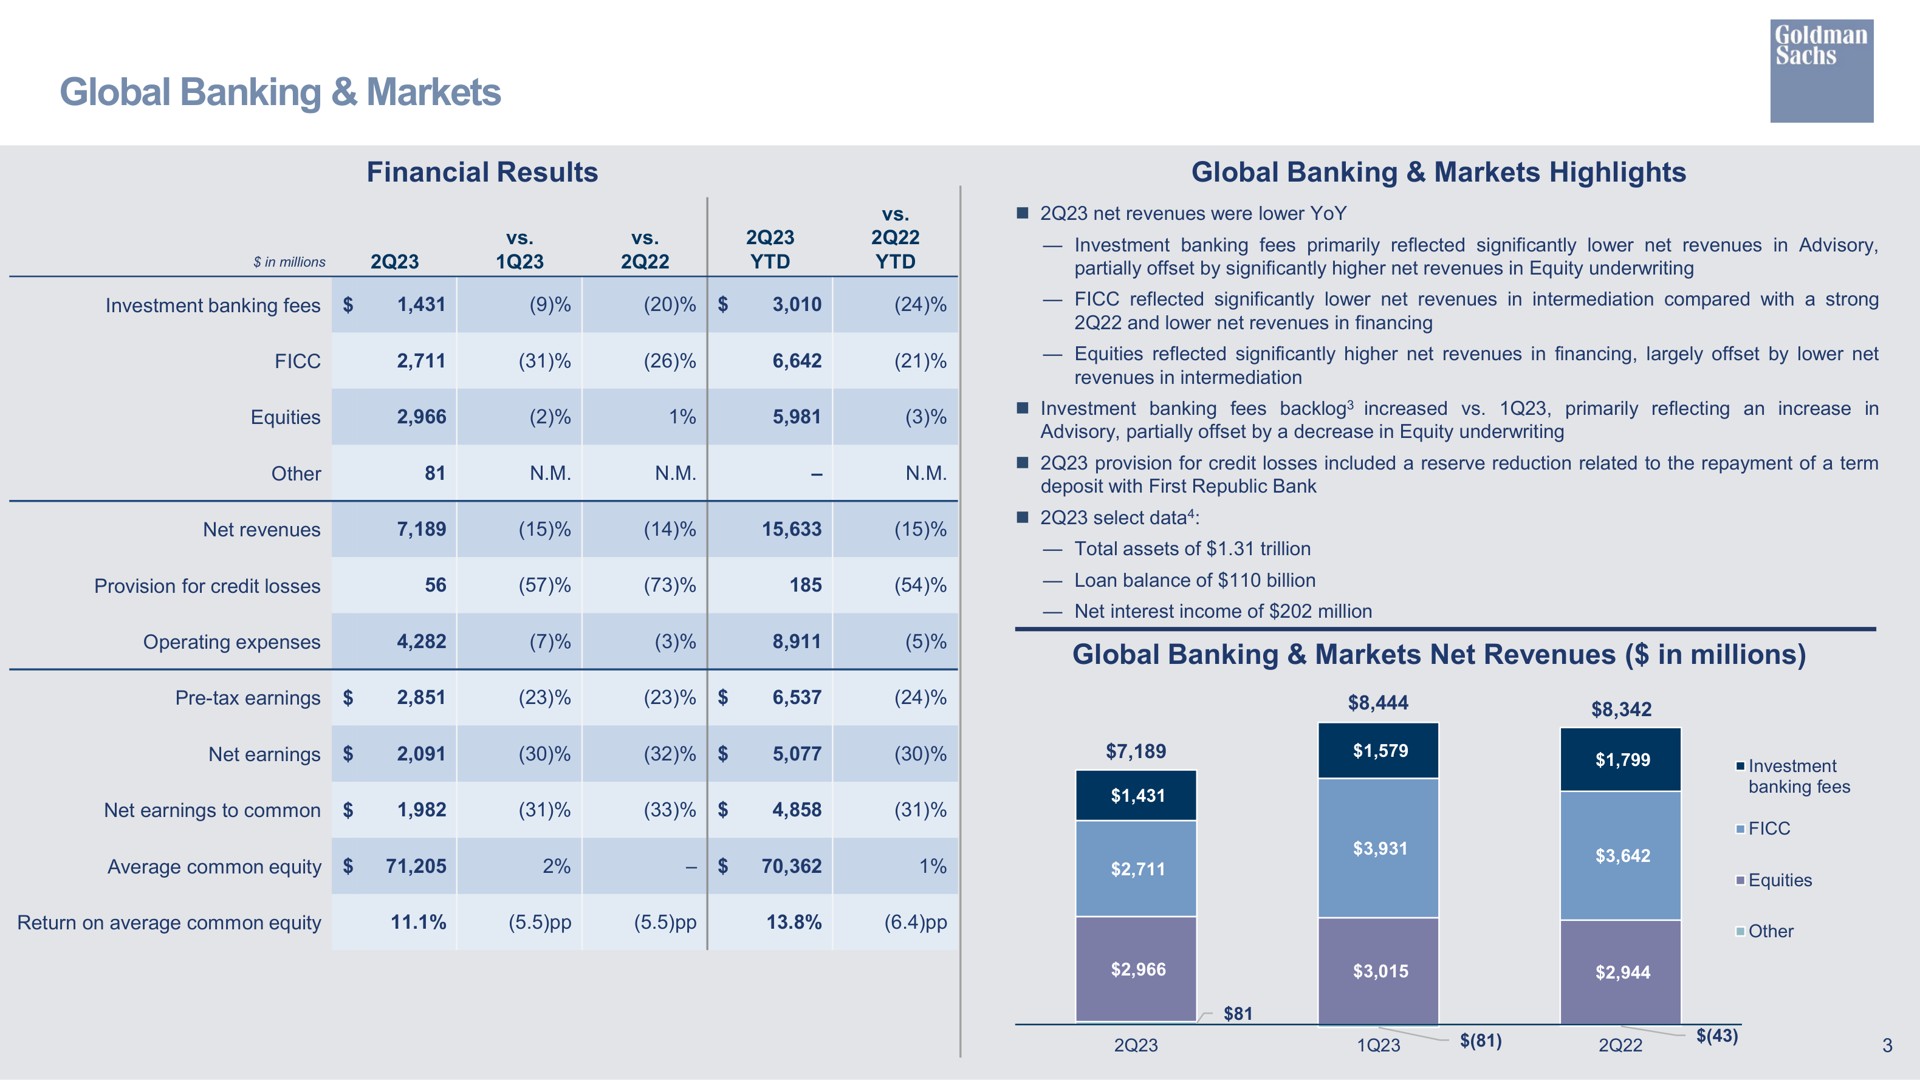 global banking markets financial results global banking markets highlights global banking markets net revenues in millions | Goldman Sachs